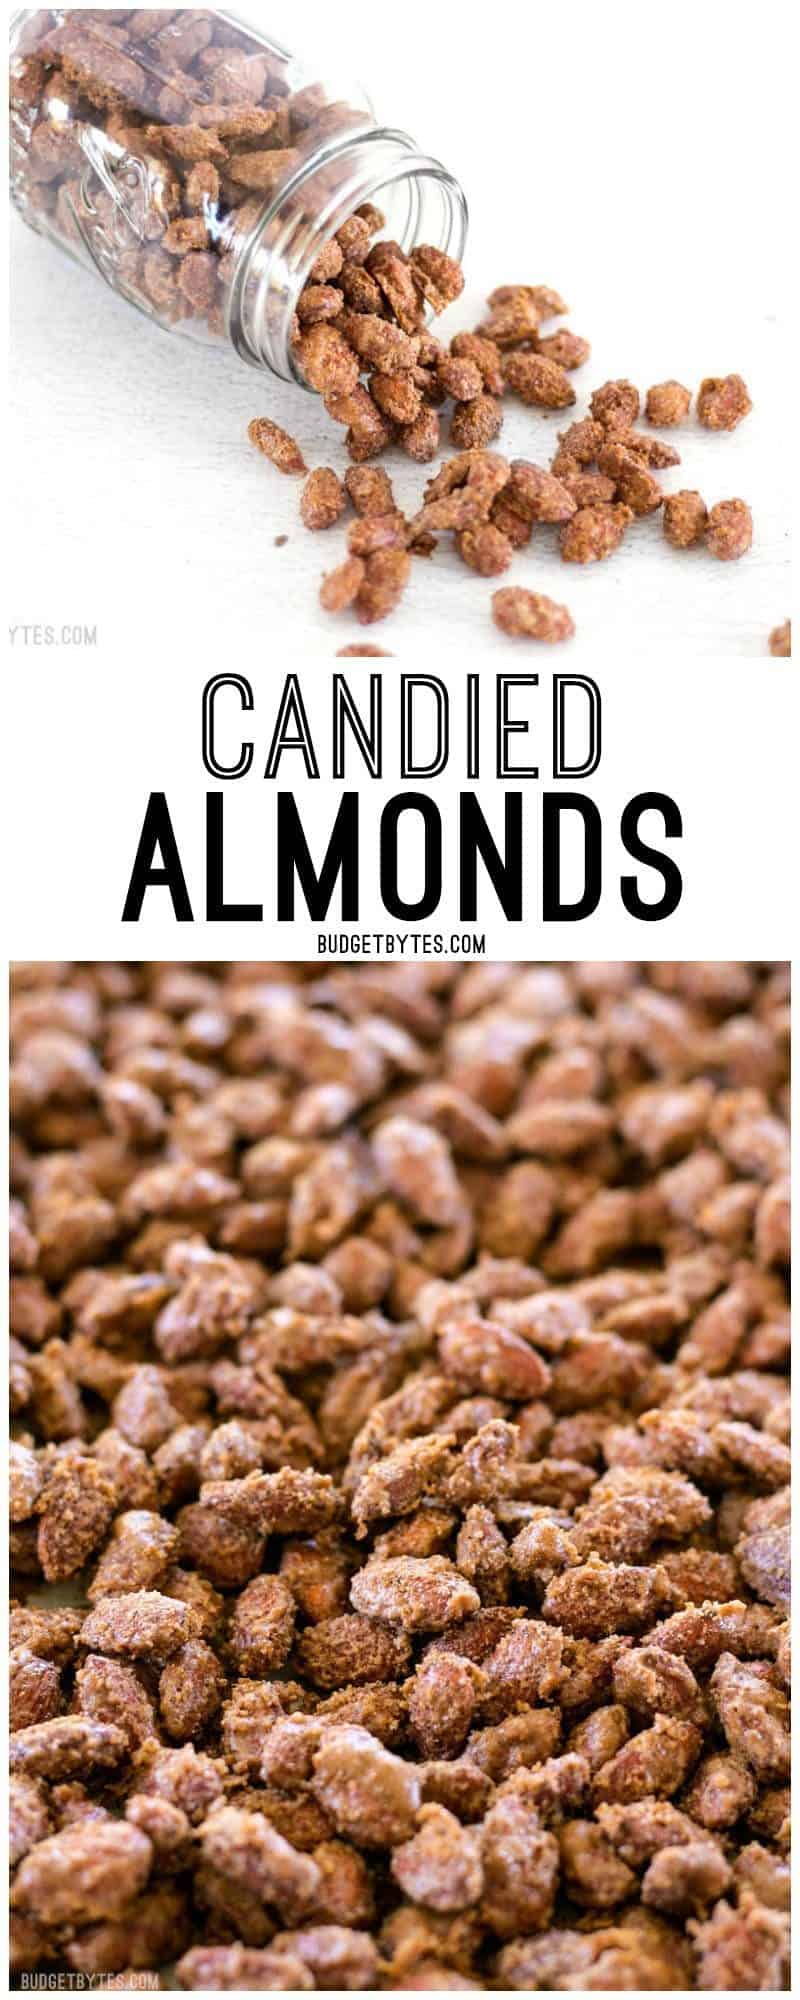 Homemade Candied Almonds are a fraction of the price of store bought and make great homemade gifts for the holidays! BudgetBytes.com